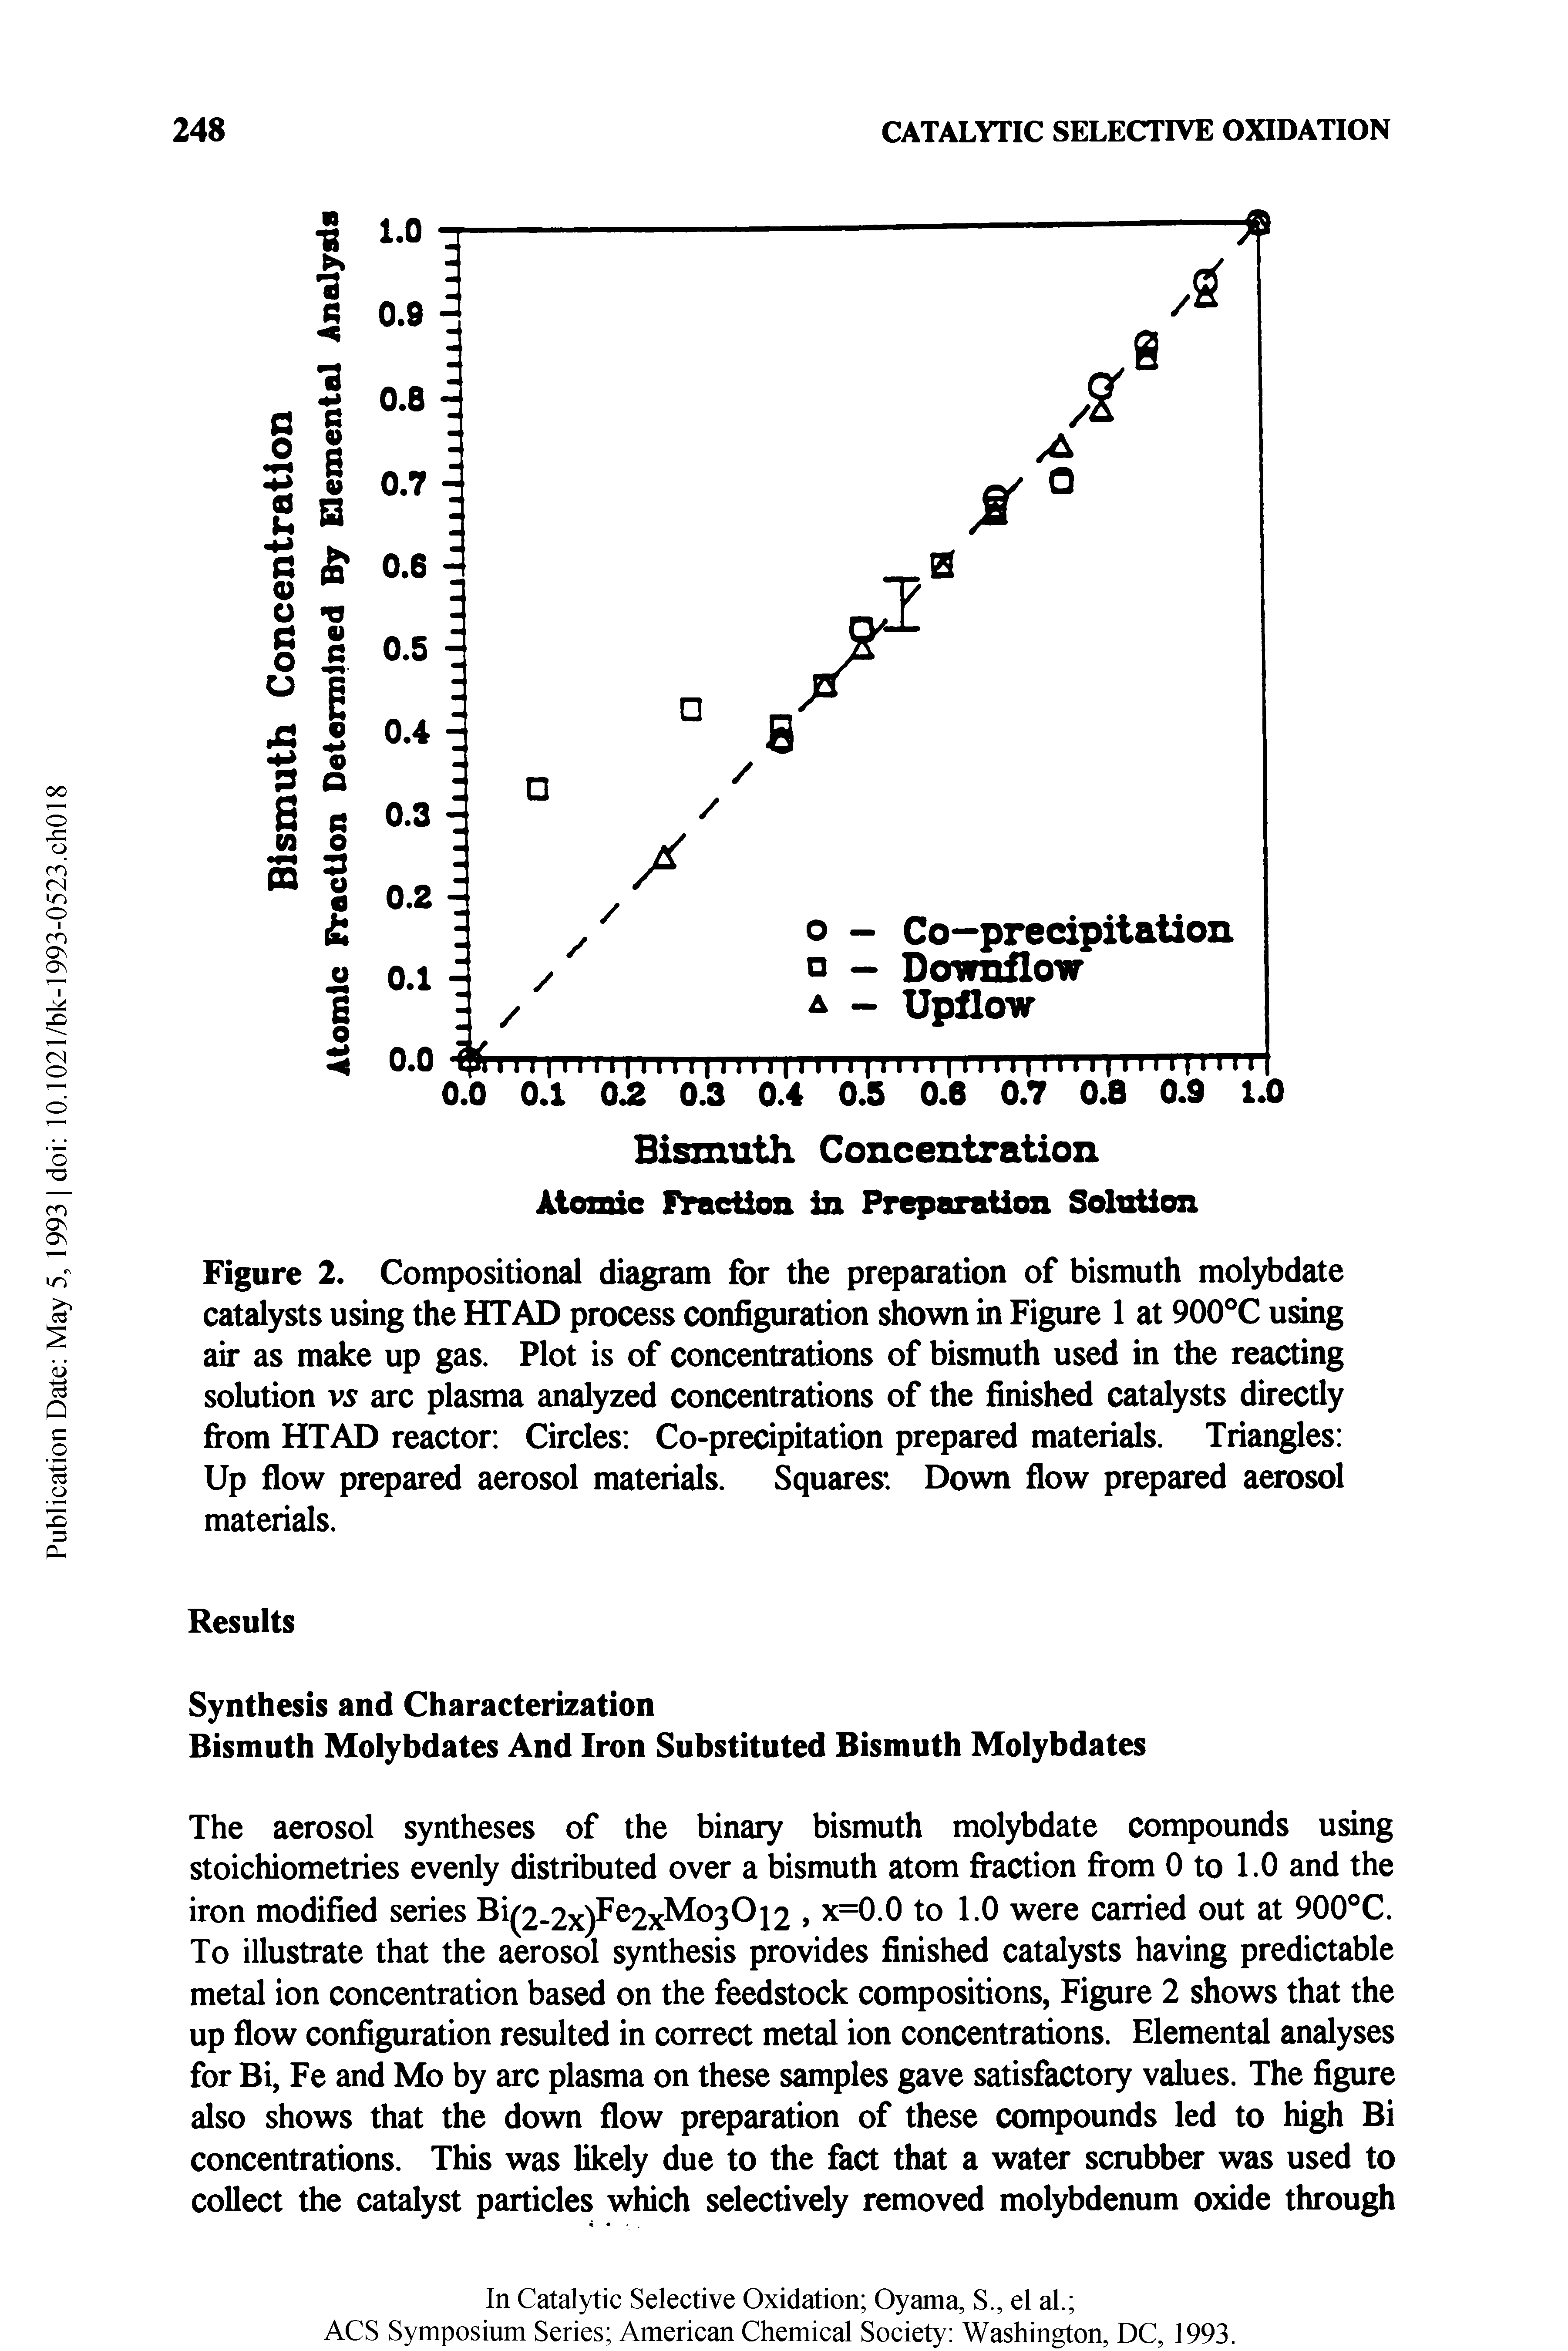 Figure 2. Compositional diagram for the preparation of bismuth molybdate catalysts using the HI AD process configuration shown in Figure 1 at 900°C using air as make up gas. Plot is of concentrations of bismuth used in the reacting solution vs arc plasma analyzed concentrations of the finished catalysts directly fi-om HTAD reactor Circles Co-precipitation prepared materials. Triangles Up flow prepared aerosol materials. Squares. Down flow prepared aerosol materials.